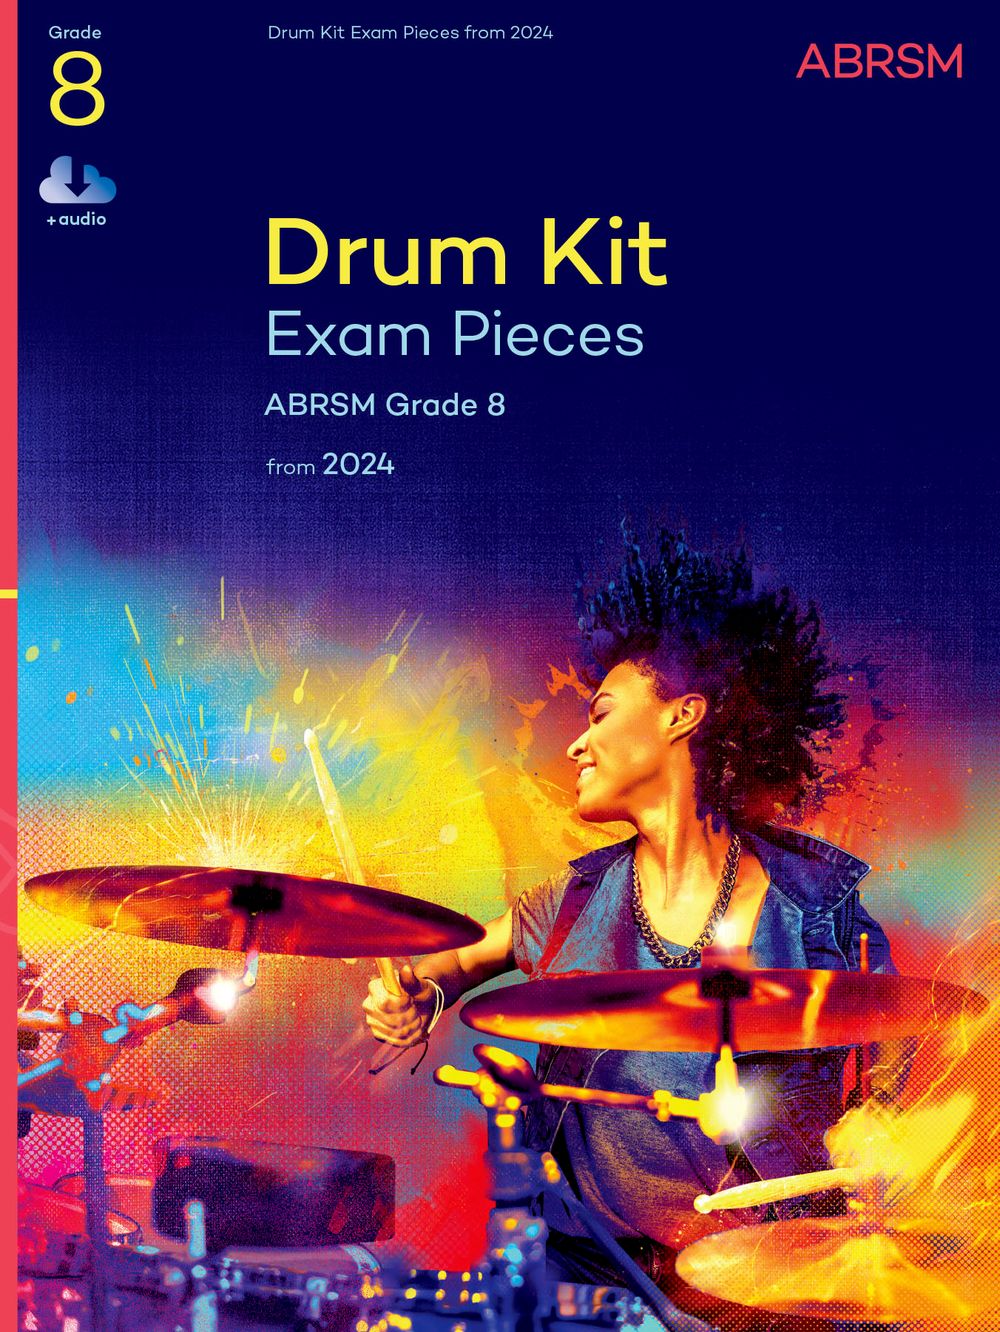 Drum Kit Exam Pieces From 2024 Grade 8 Abrsm Sheet Music Songbook